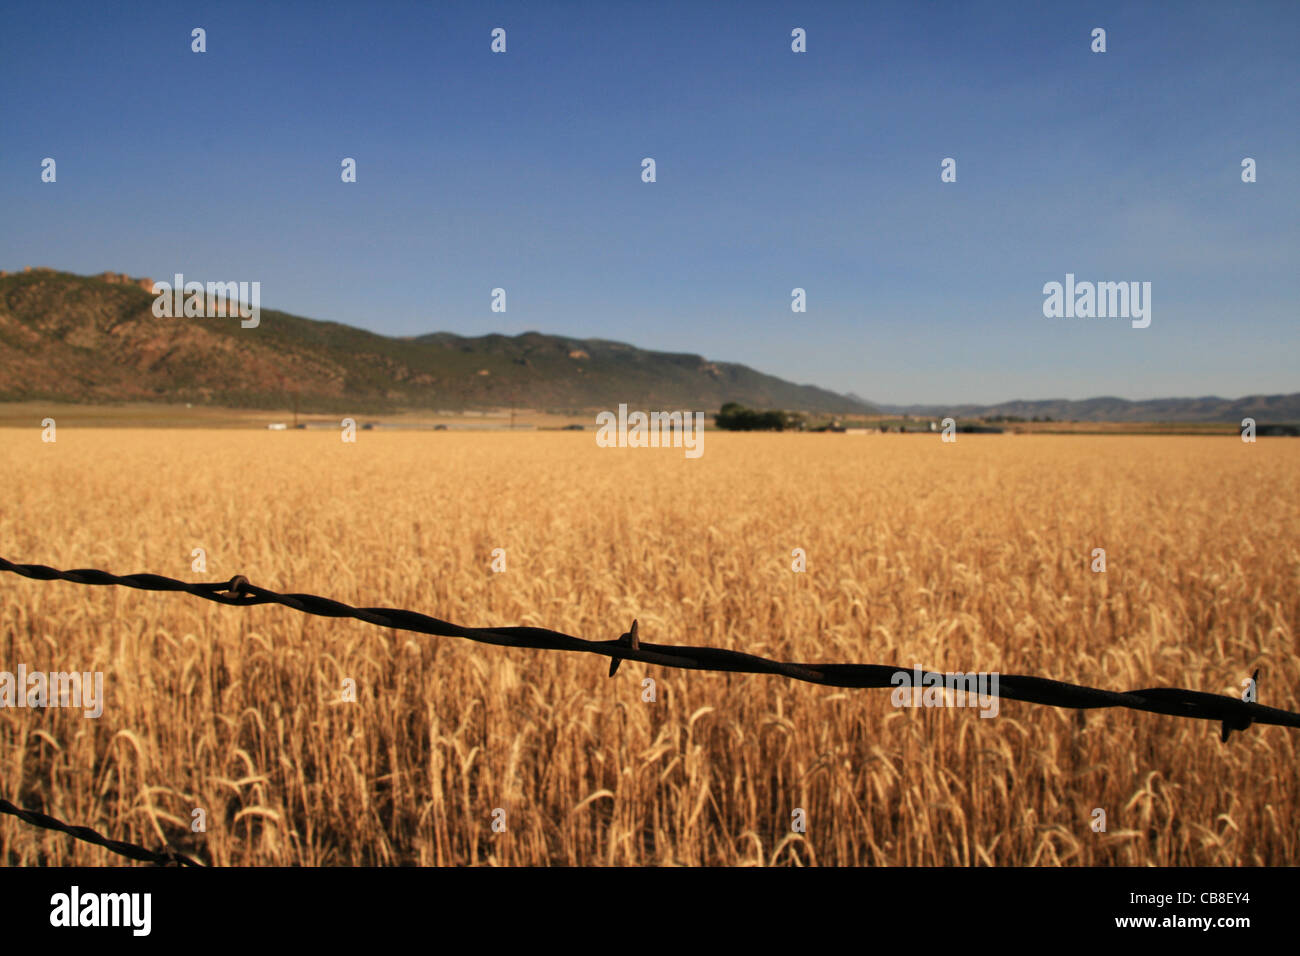 rusted barbed wire fence strand in focus with out of focus wheat field behind it Stock Photo